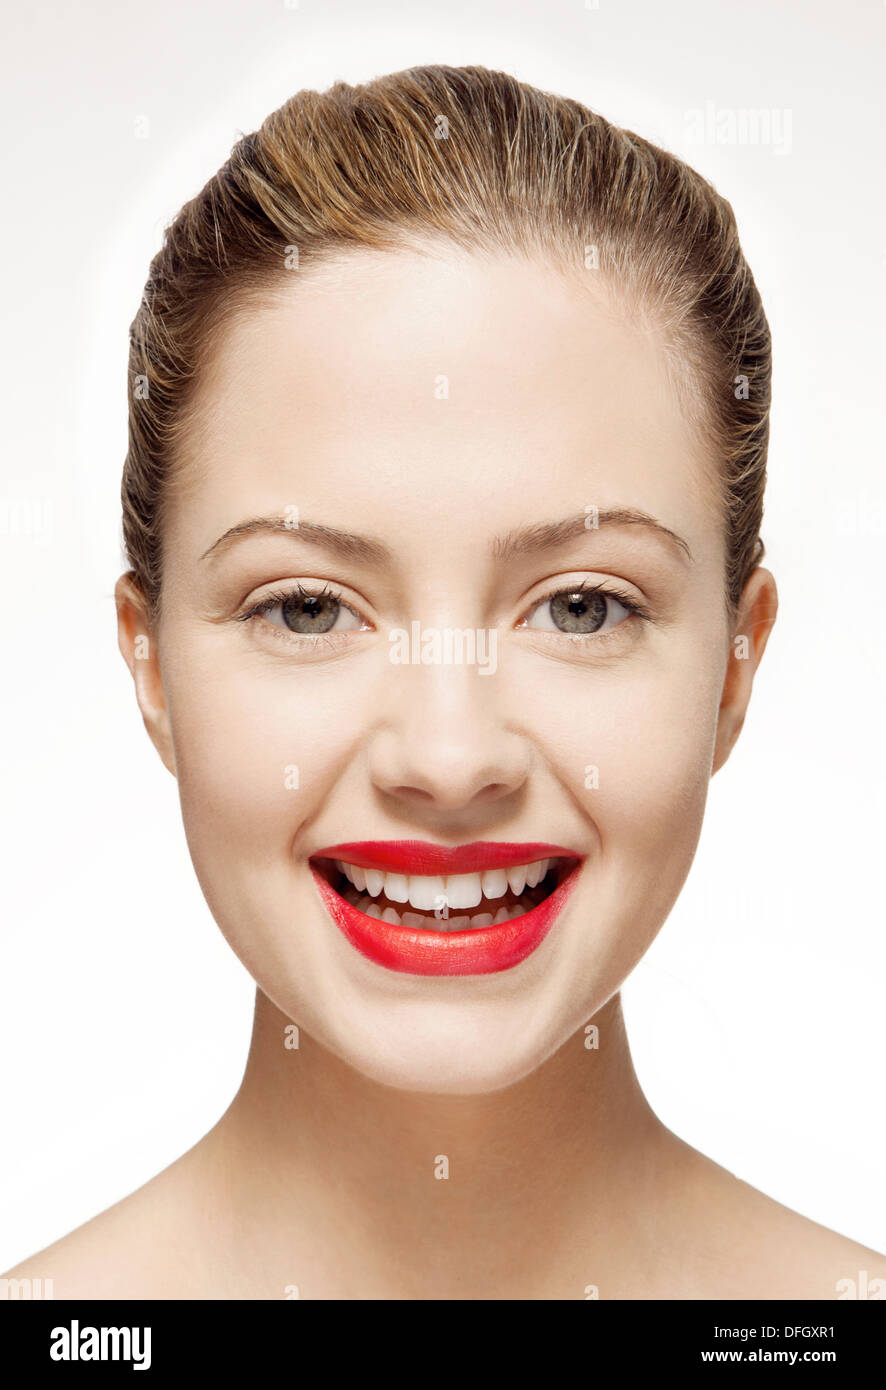 Smiling woman wearing red lipstick Stock Photo